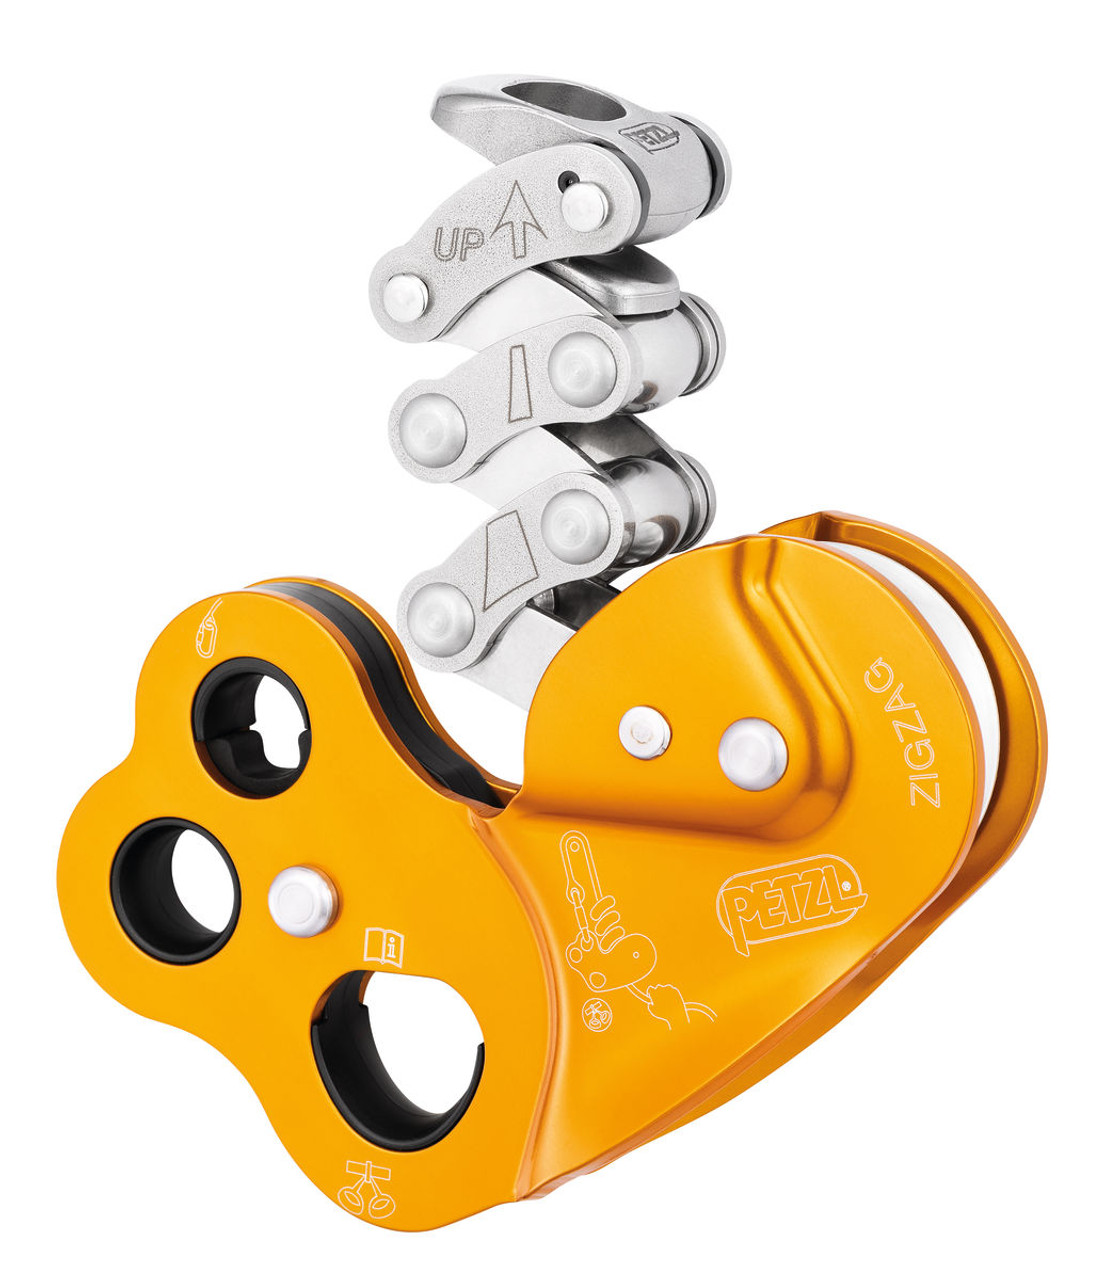 Petzl ZIGZAG Mechanical Prusik for tree care